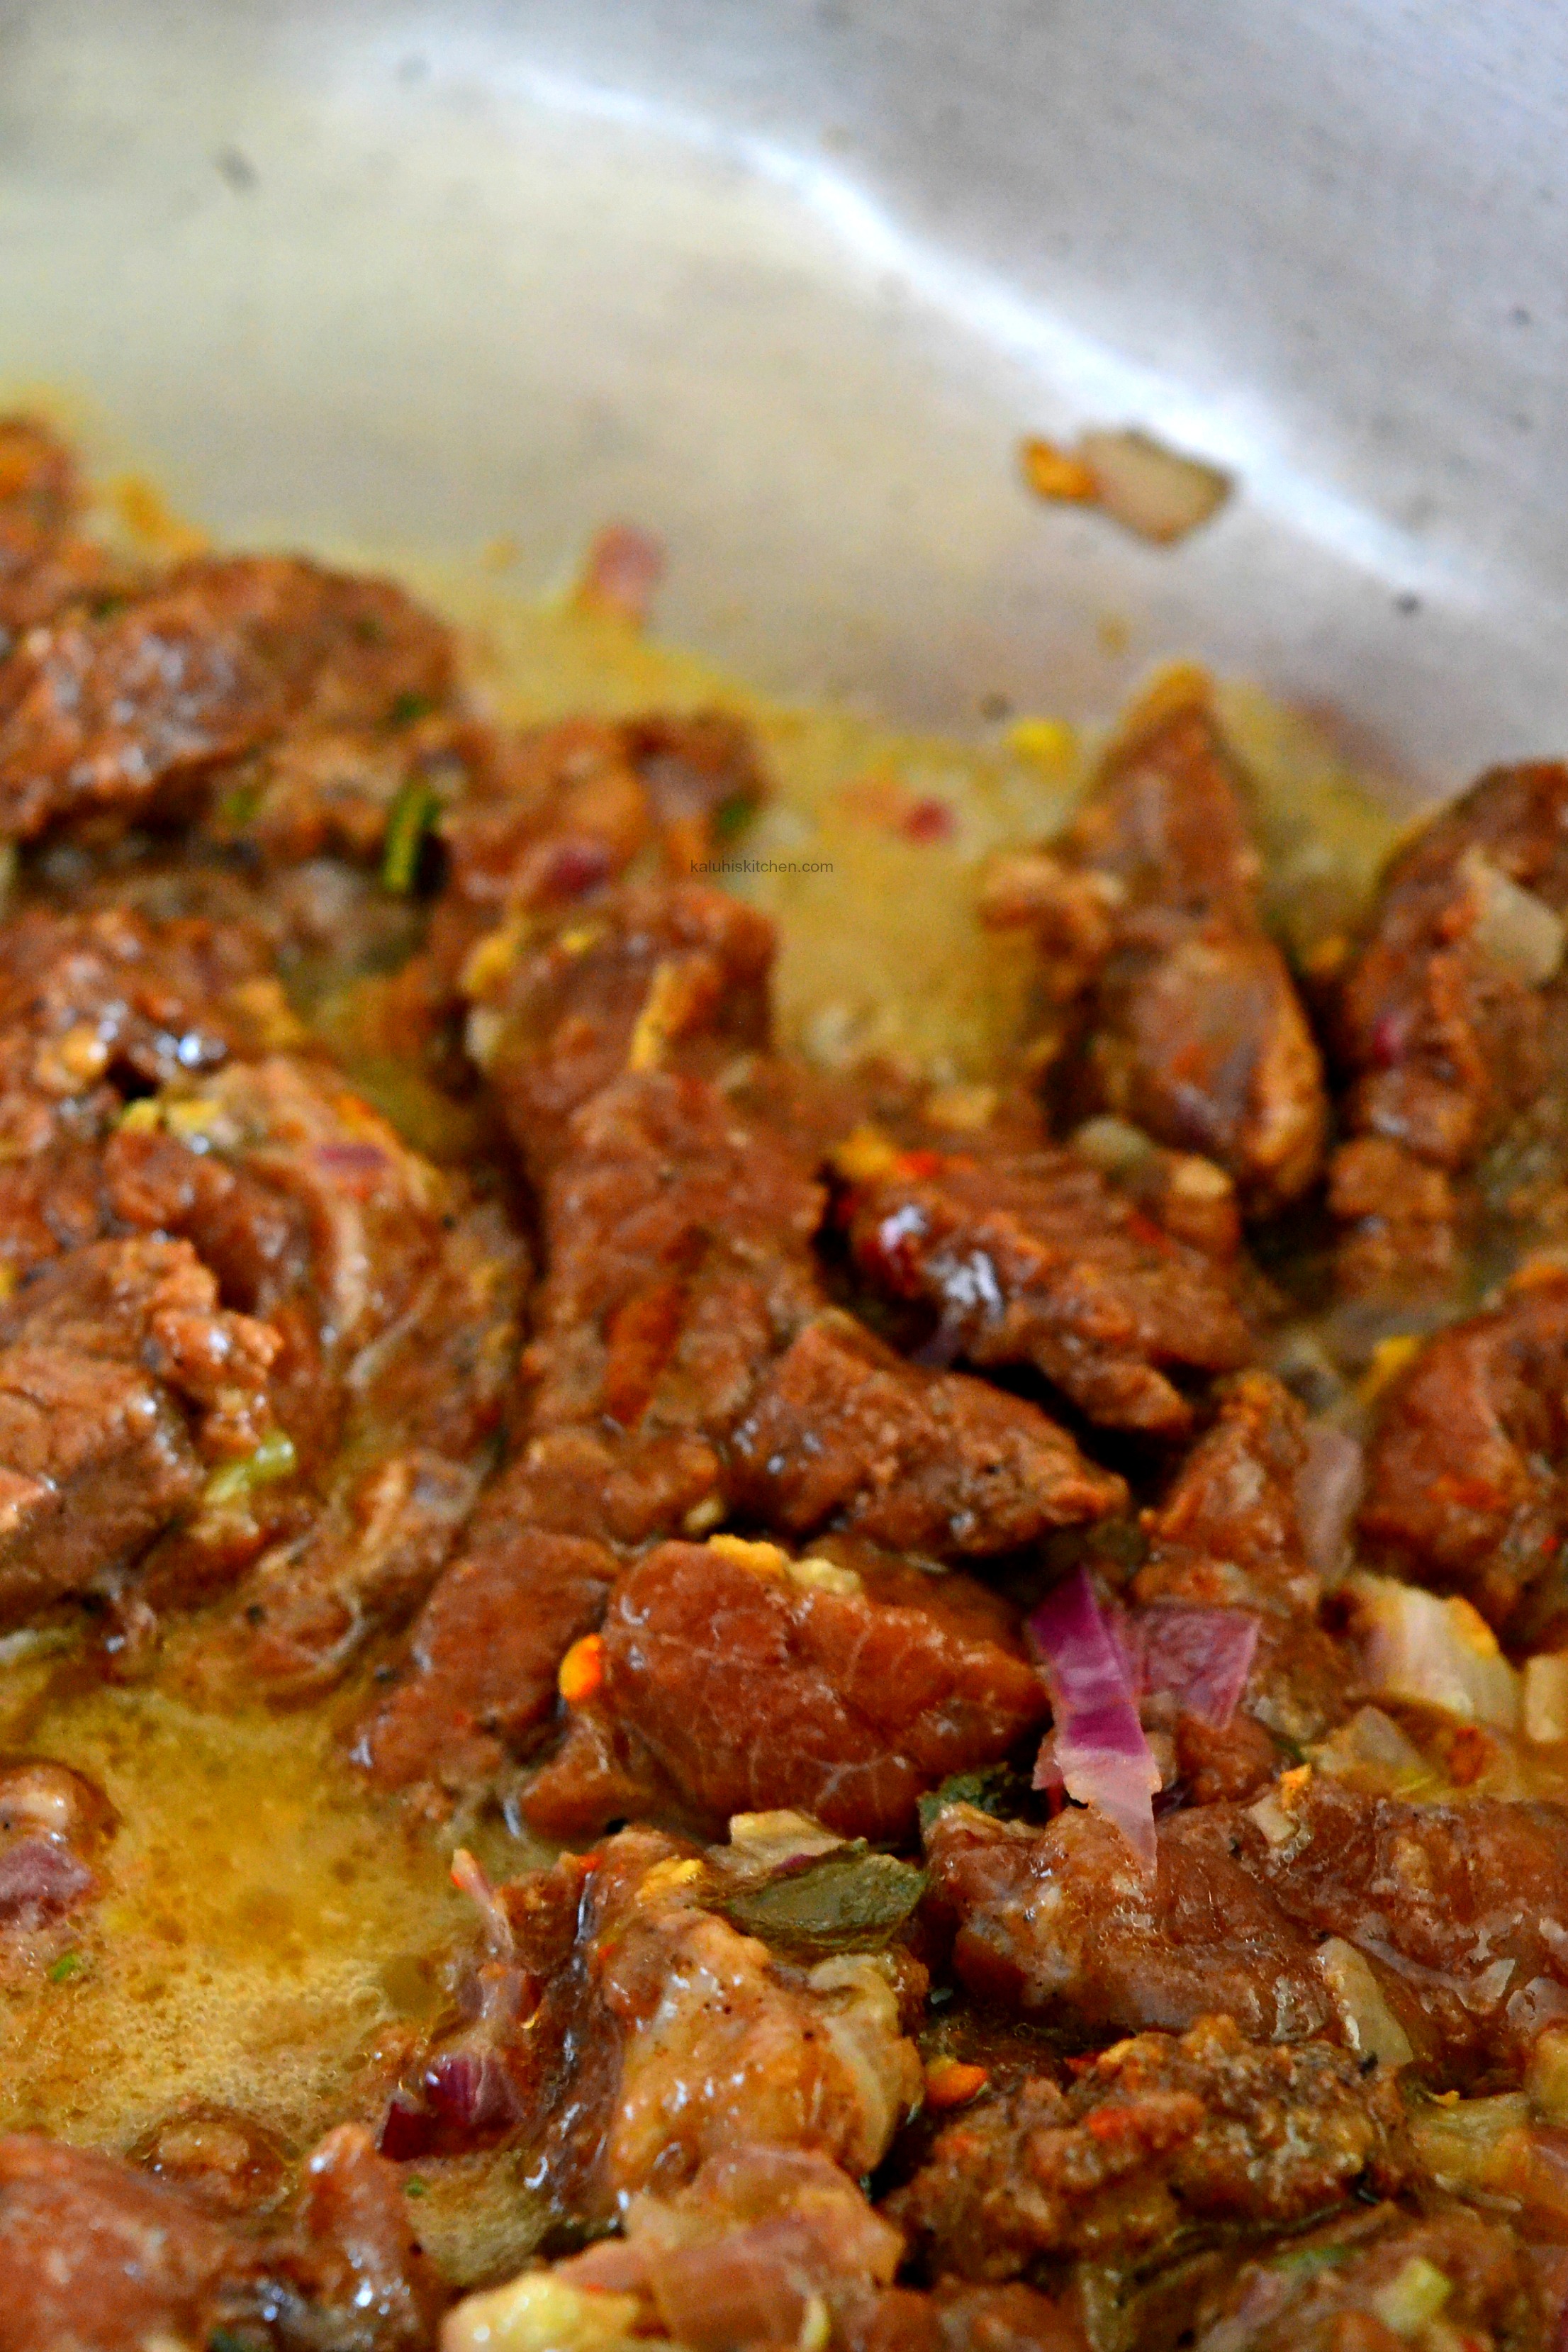 add-the-beef-to-the-onions-and-fry-it-on-high-heat-intil-fully-browned-on-the-outside_kaluhiskitchen-com_chili-and-coffee-marinated-beef-dry-fry